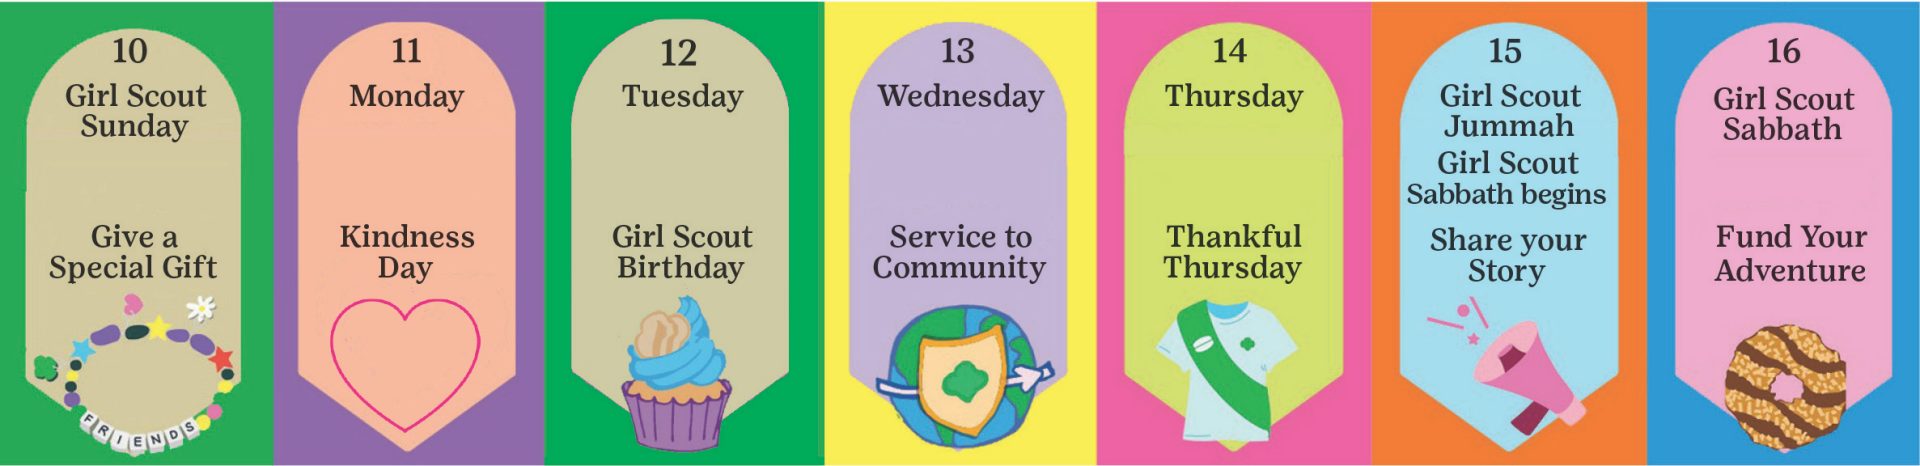 Dates and themes for Girl Scout Week 2024 including Girl Scout Sunday, Girl Scout Birthday, and more